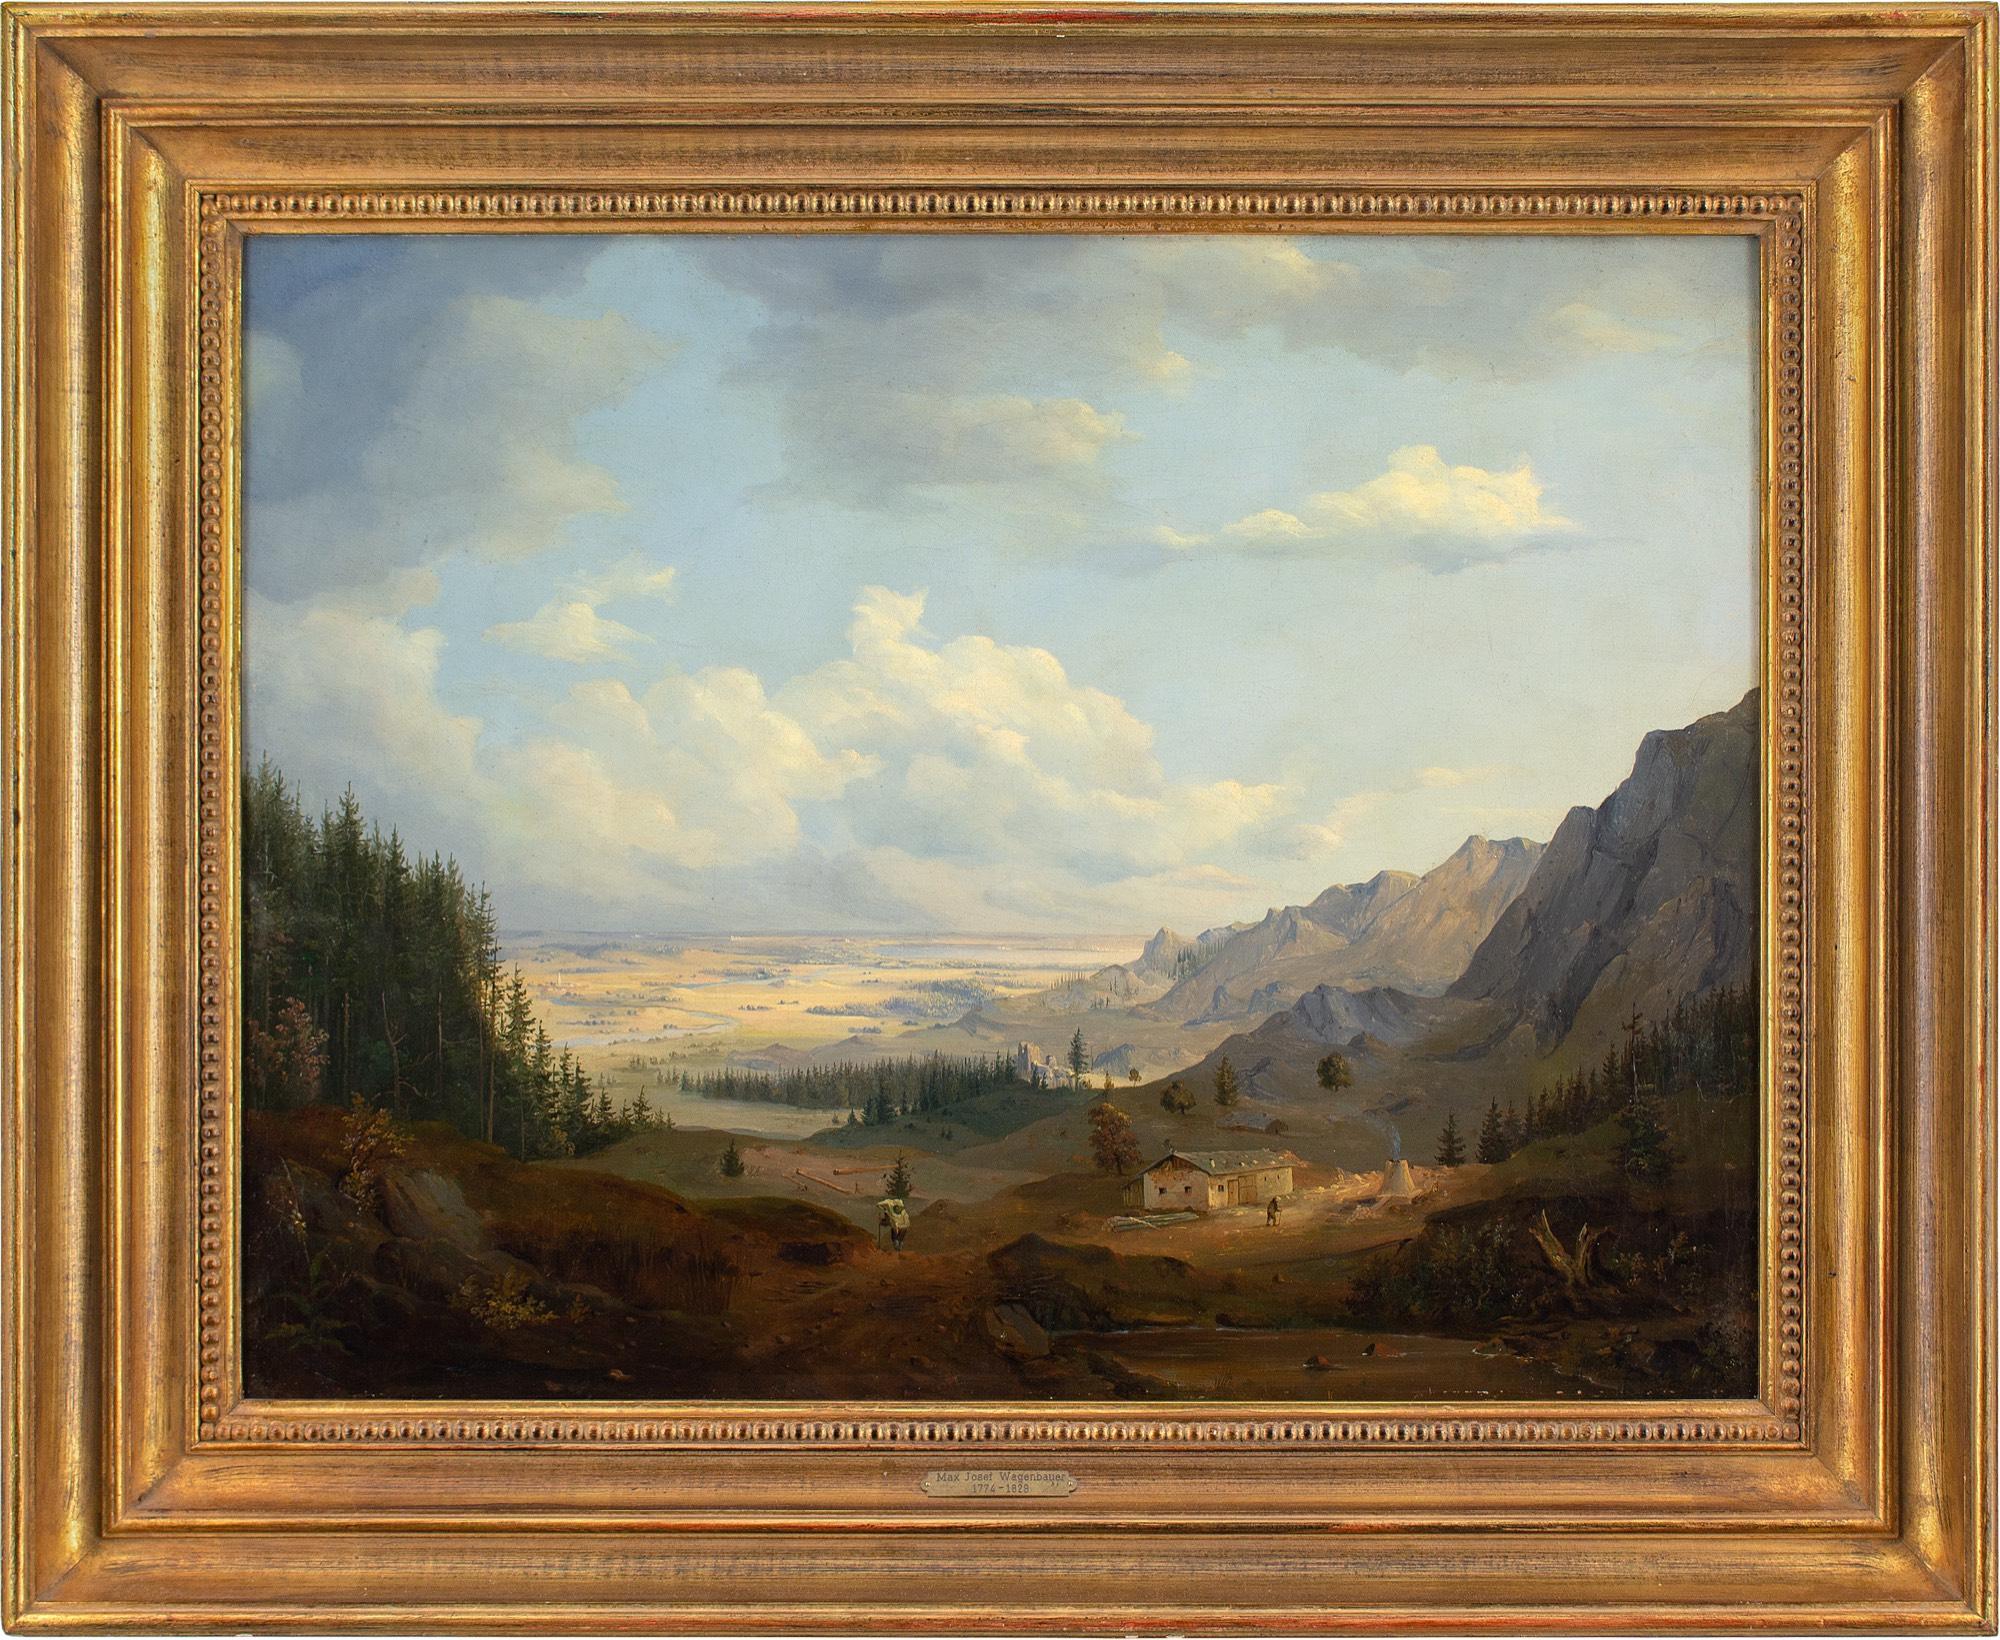 This enchanting 19th-century German oil painting depicts an epic vista at the foothills of the Alps.

Under a vast rolling sky, the majestic scenery extends for miles before vanishing into a distant haze. On the left, a wall of fir trees snake